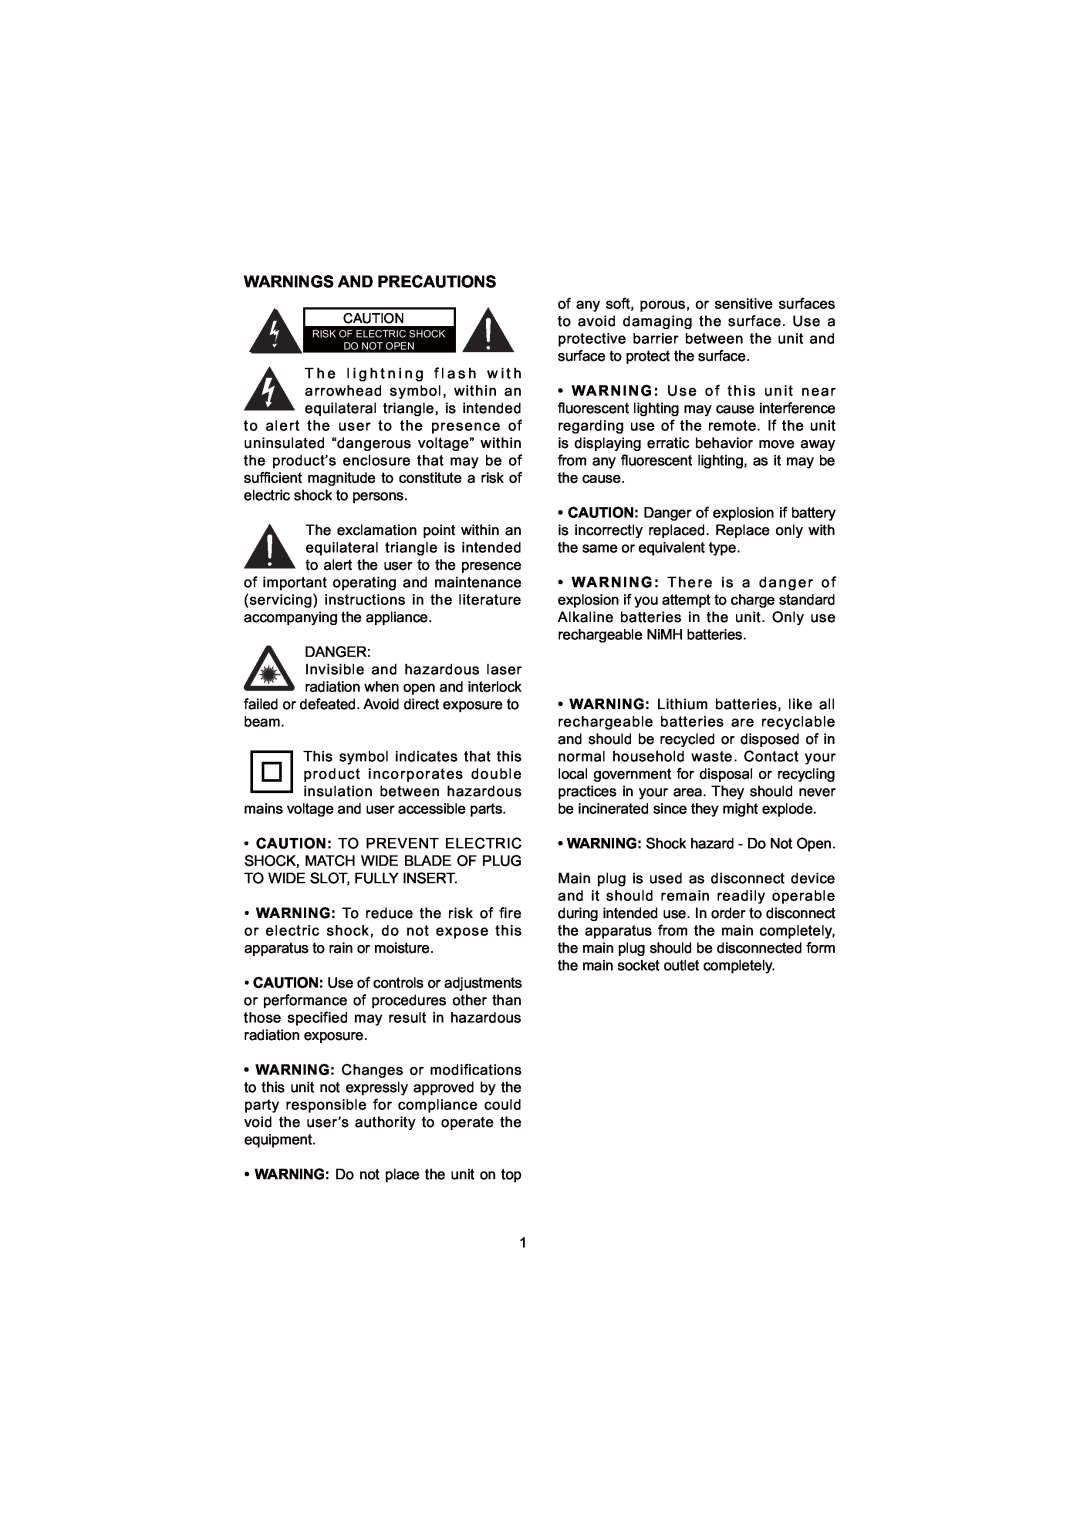 ProScan PSP288-PL user manual Warnings And Precautions 